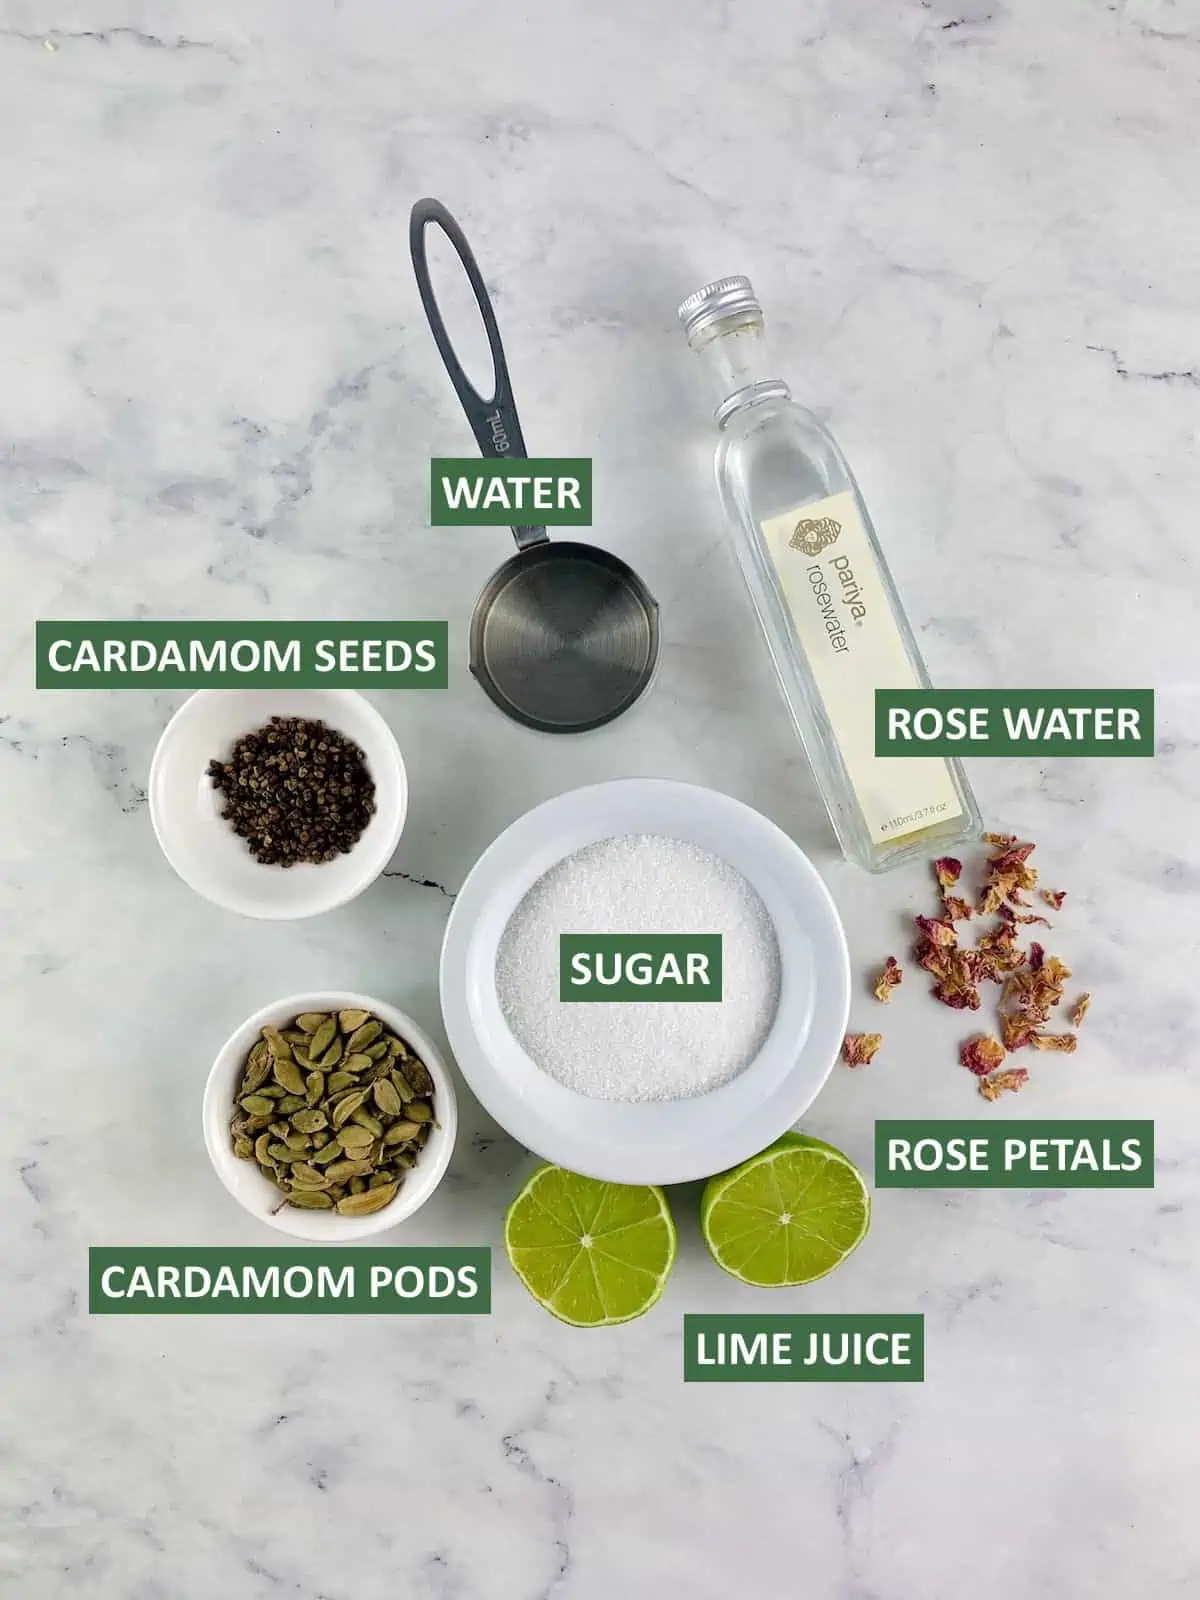 LABELLED INGREDIENTS NEEDED TO MAKE CARDAMOM SYRUP